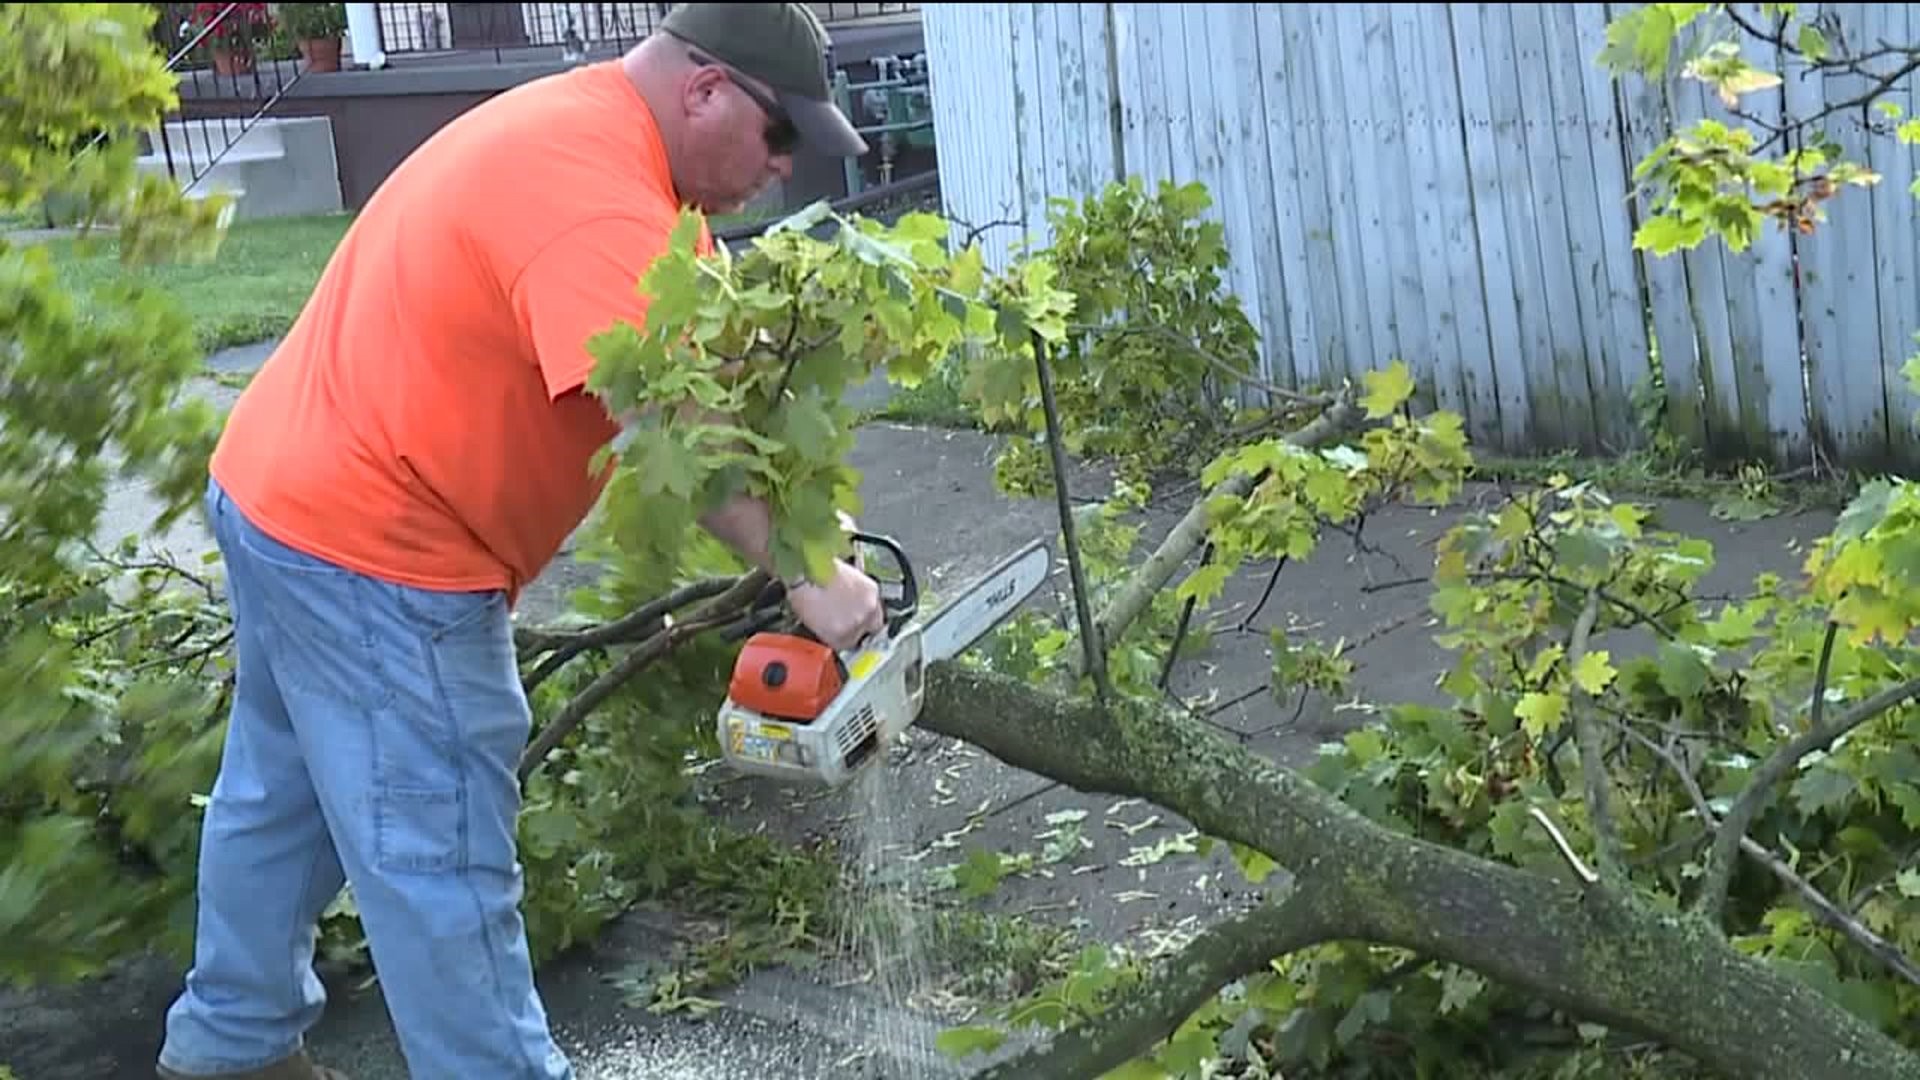 Cleanup in Scranton after Storms Rip City